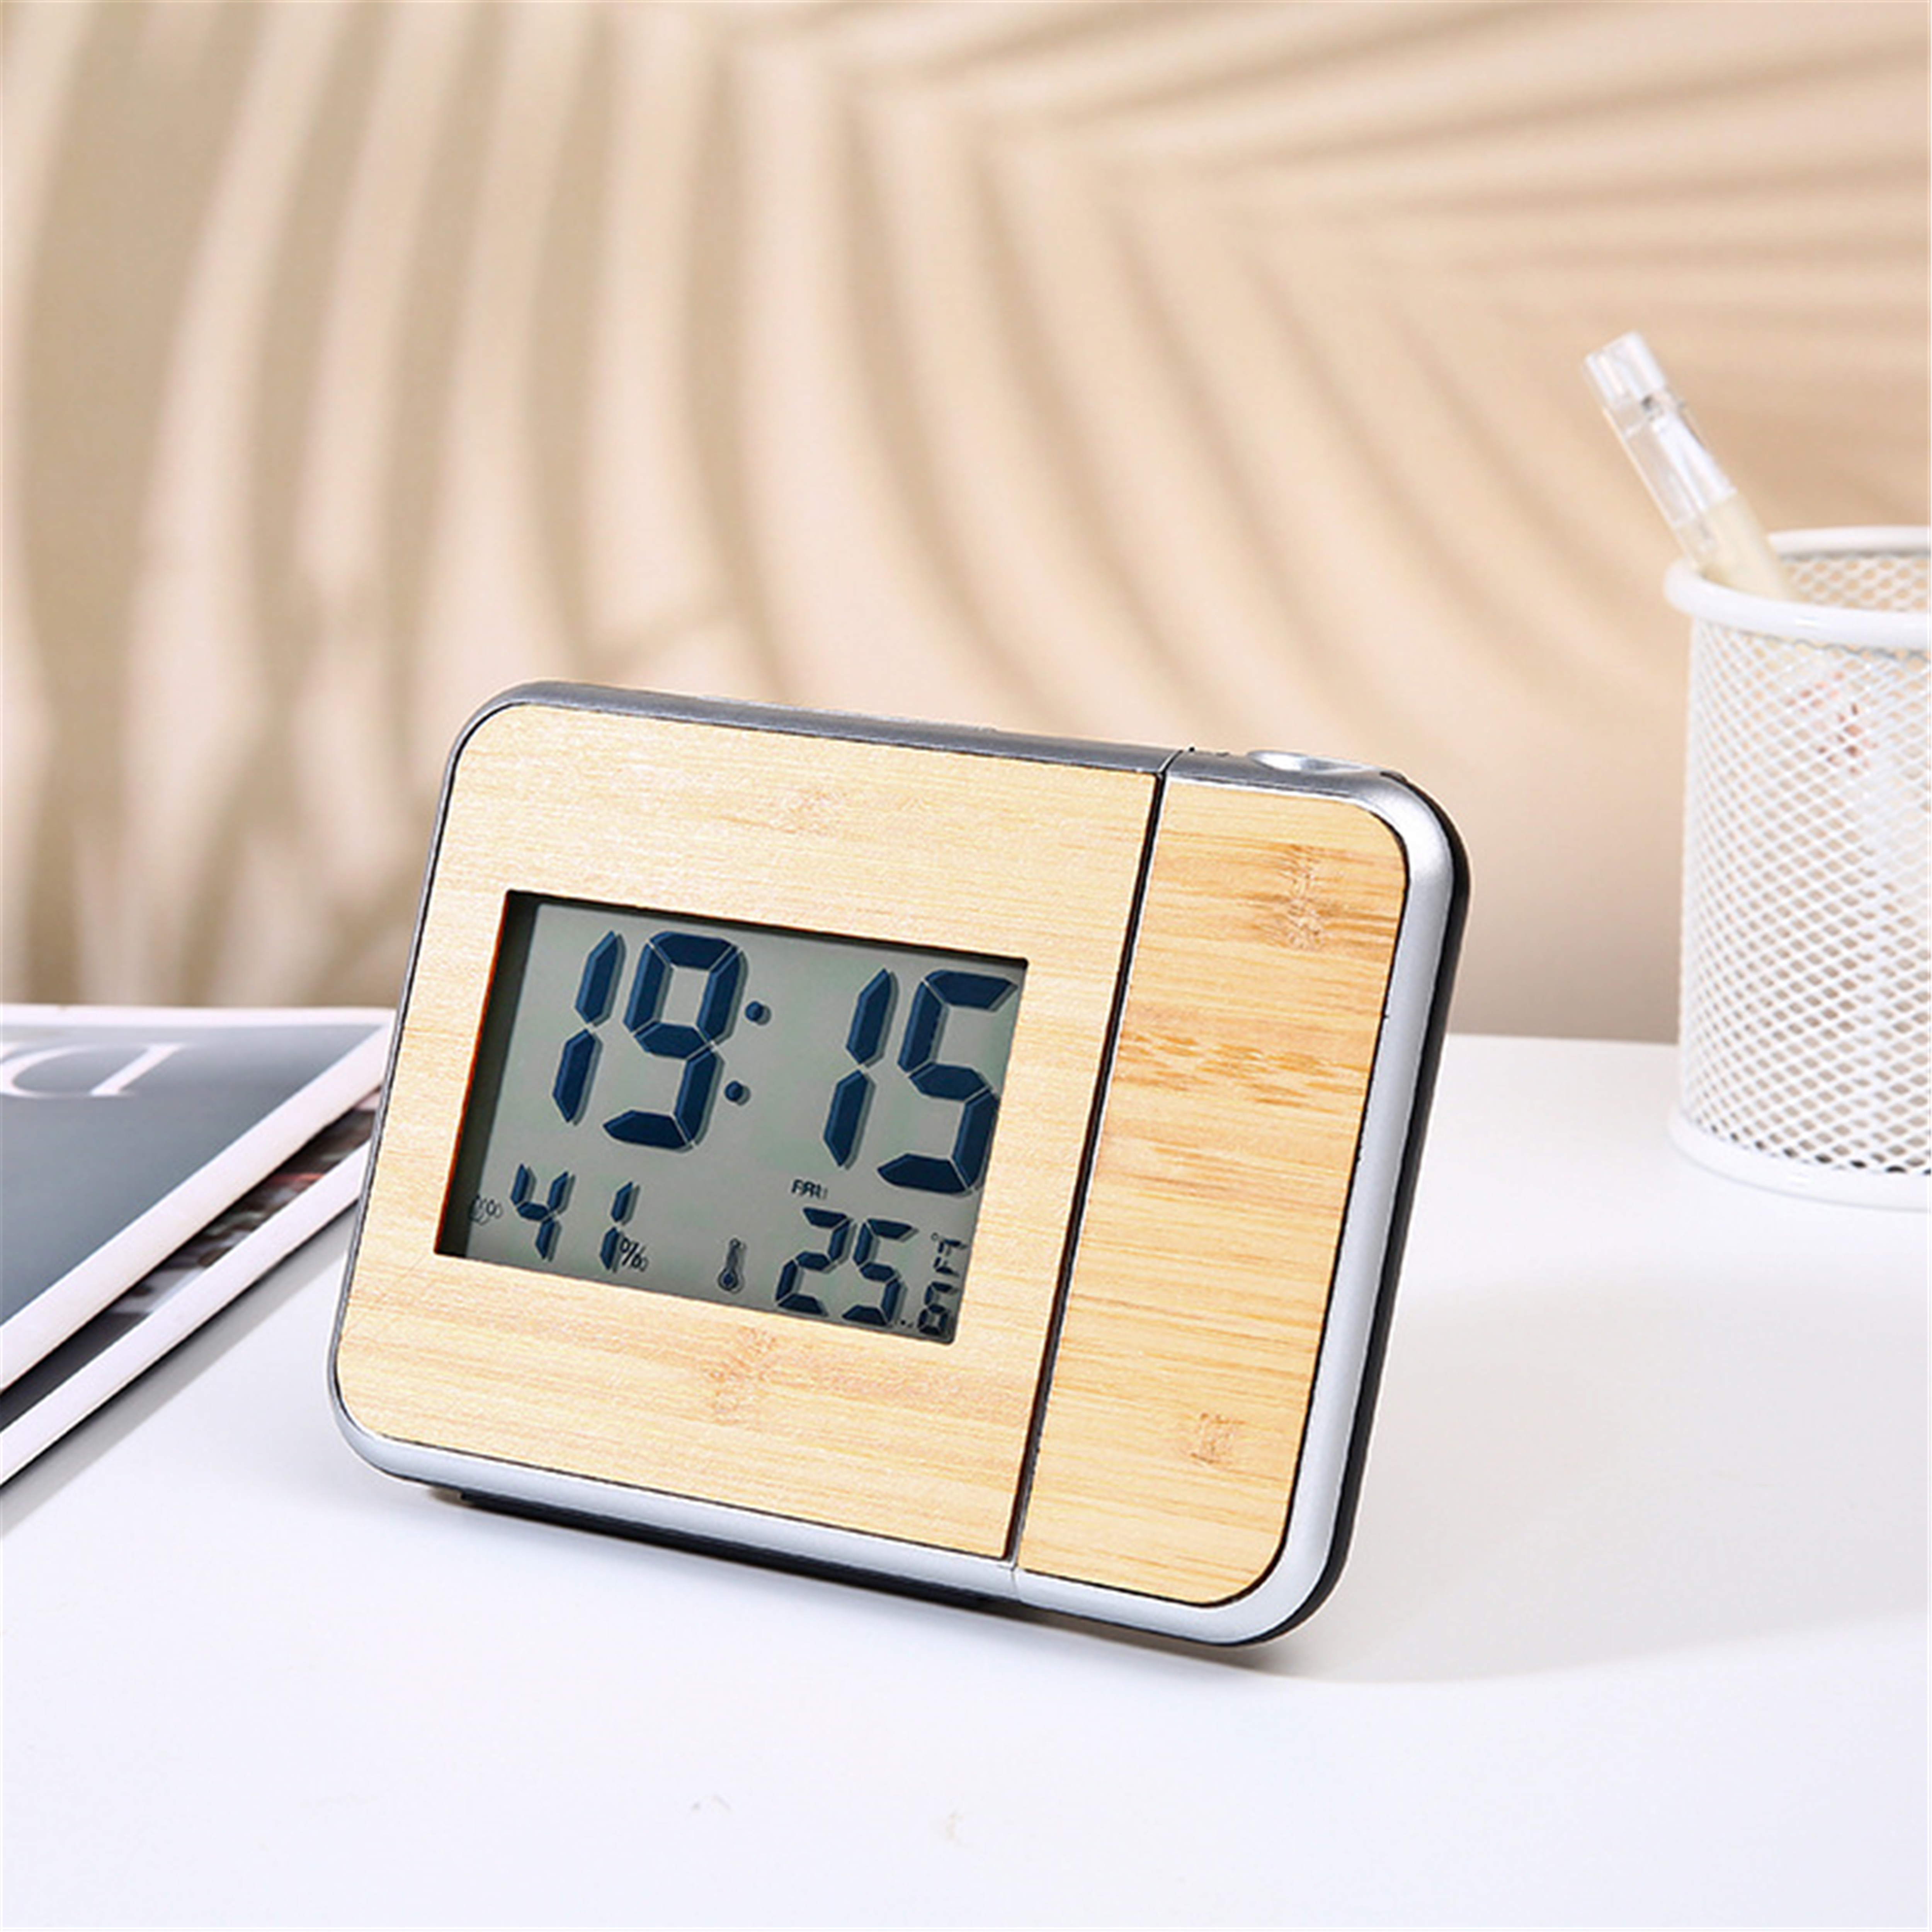 Creative backlight weather clock Home multi-function indoor desktop bamboo wood temperature and humidity digital display projection clock